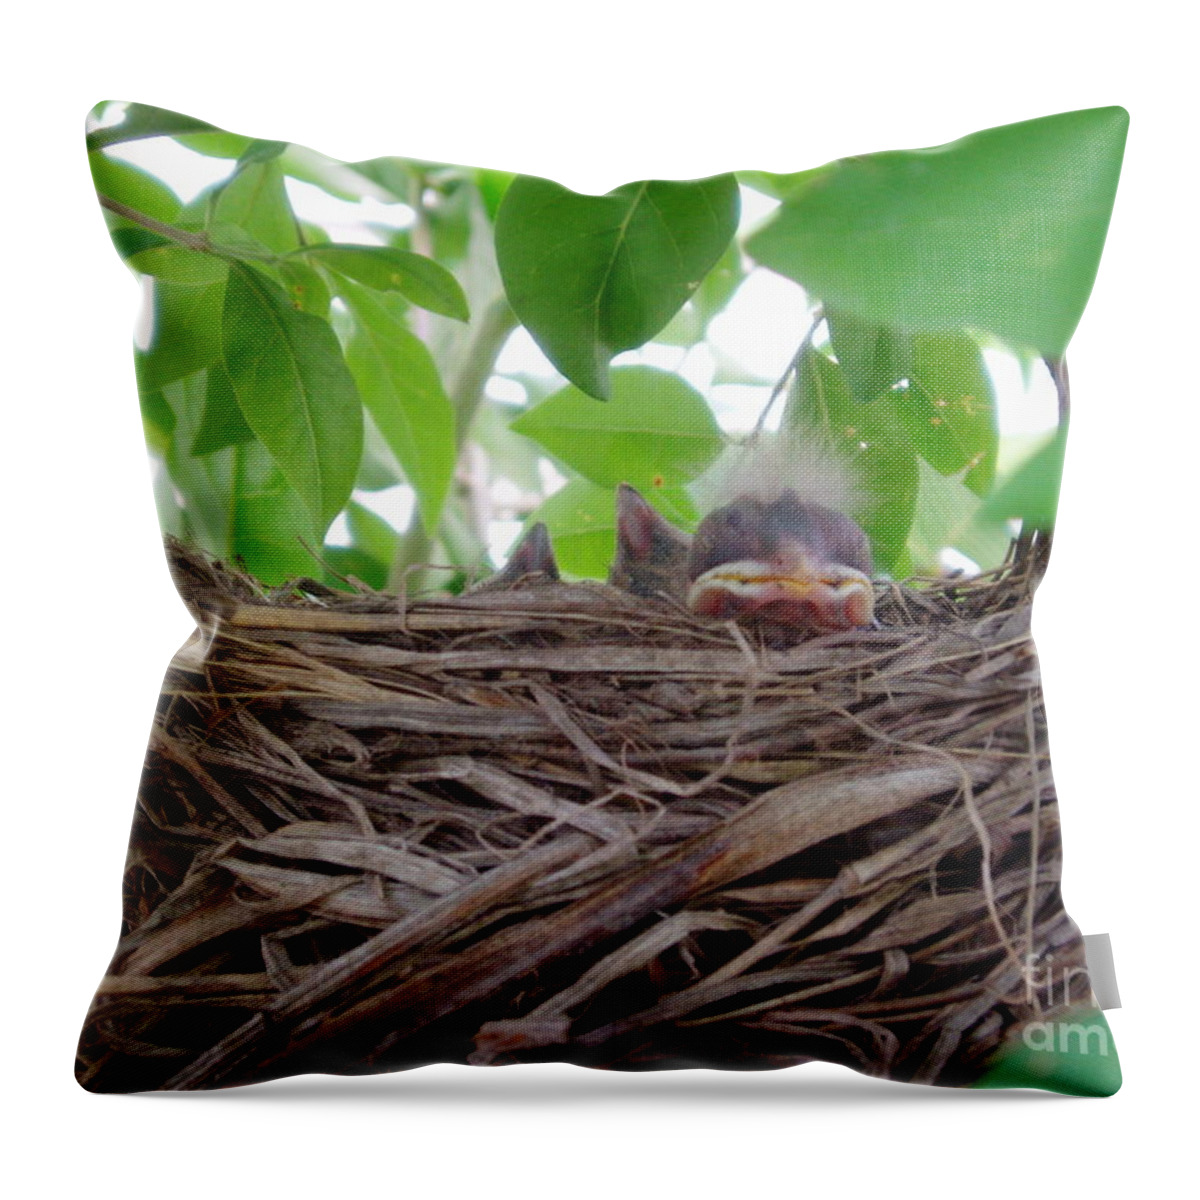 Birds Throw Pillow featuring the photograph Baby's Mohawk by Jennifer E Doll